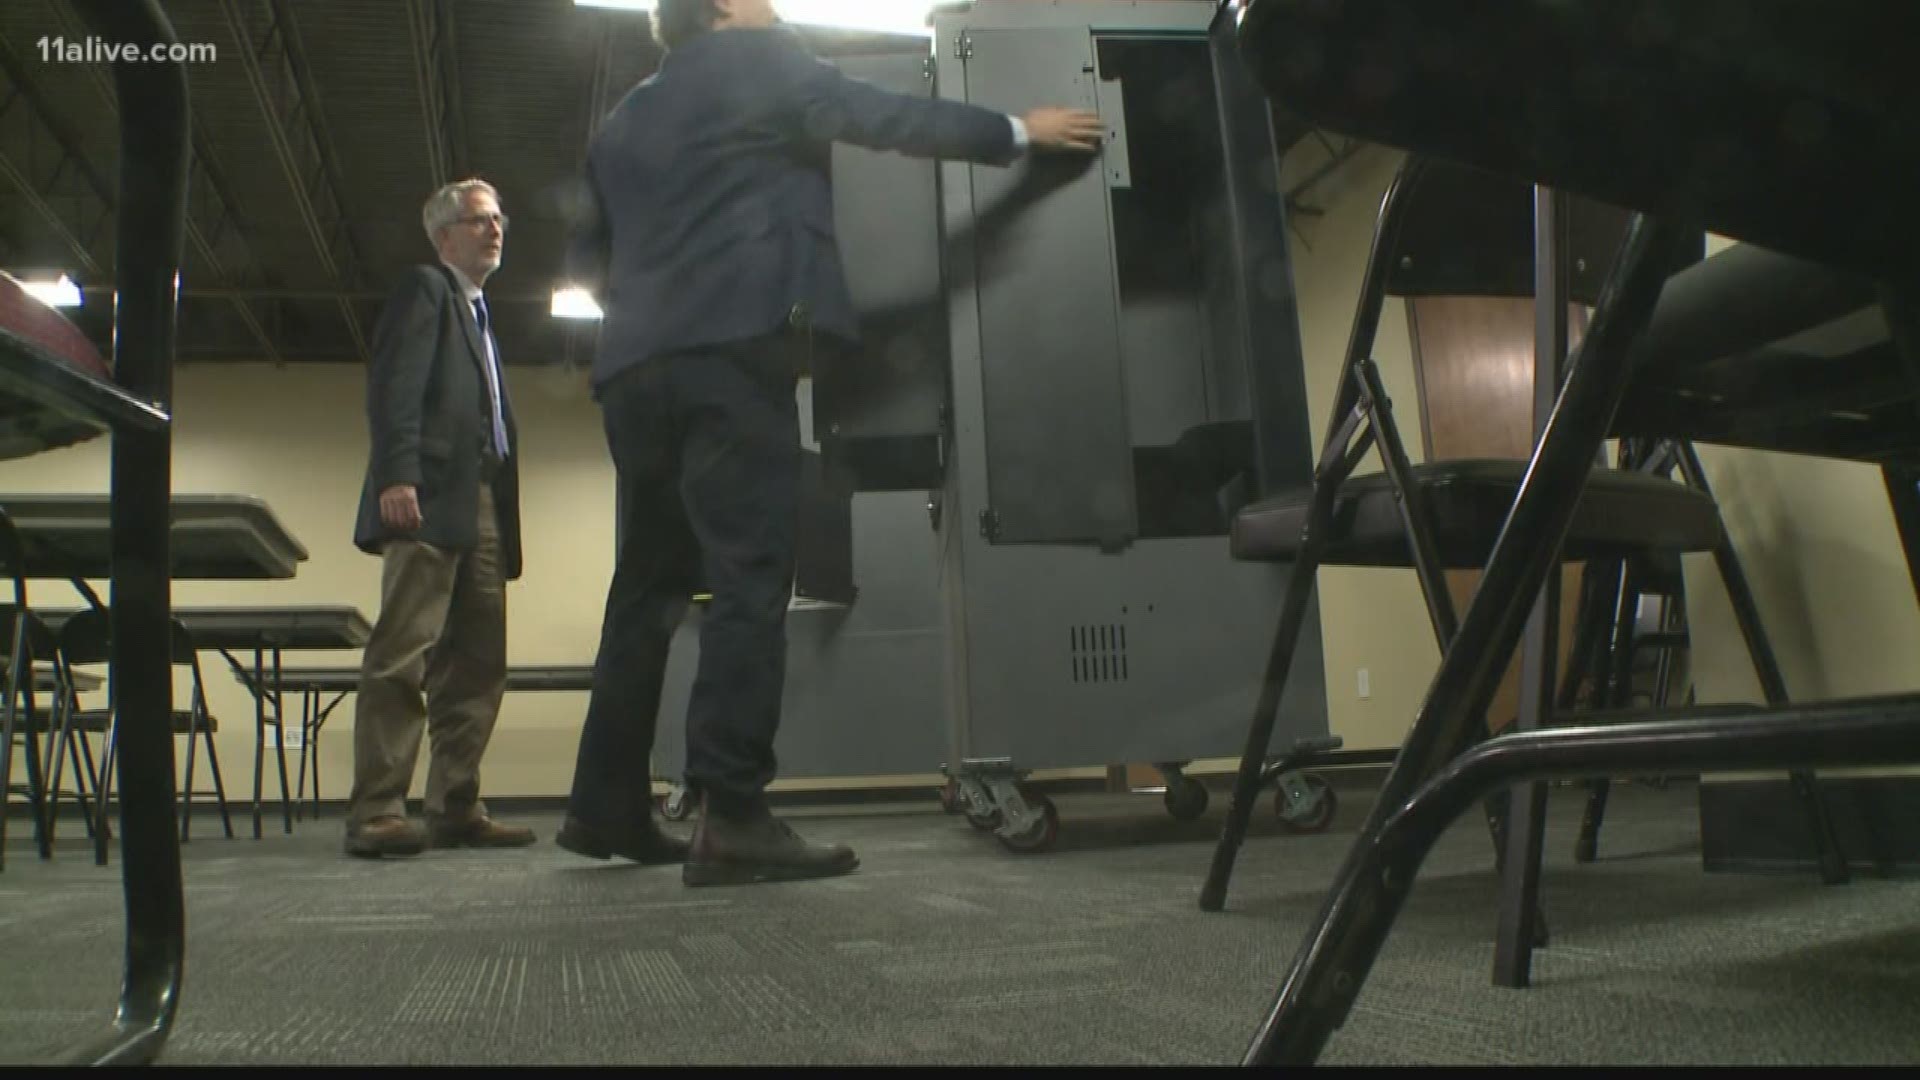 Many voters will see the new machines inside large metal cabinets purchased by Fulton County. 
The question is whether a hacker could make mischief inside one